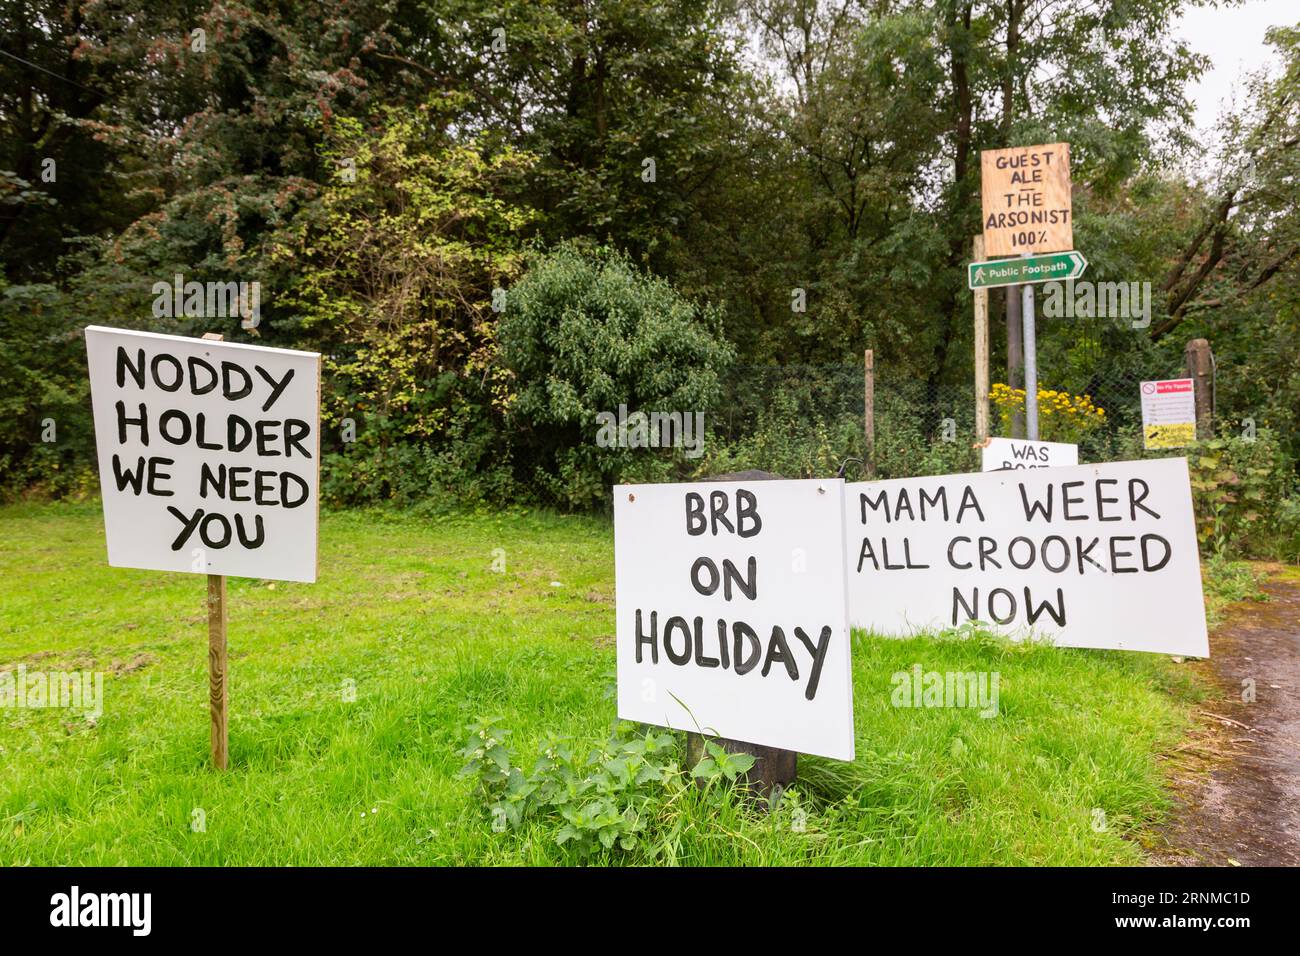 Himley, Staffordshire, UK. 2nd Sep, 2023. Four weeks after the famous Crooked House pub burned down, protest signs and the Black Country's flag are displayed in support of re-building the landmark building in the same location. Signs refer to local Slade frontman Noddy Holder. Credit: Peter Lopeman/Alamy Live News Stock Photo